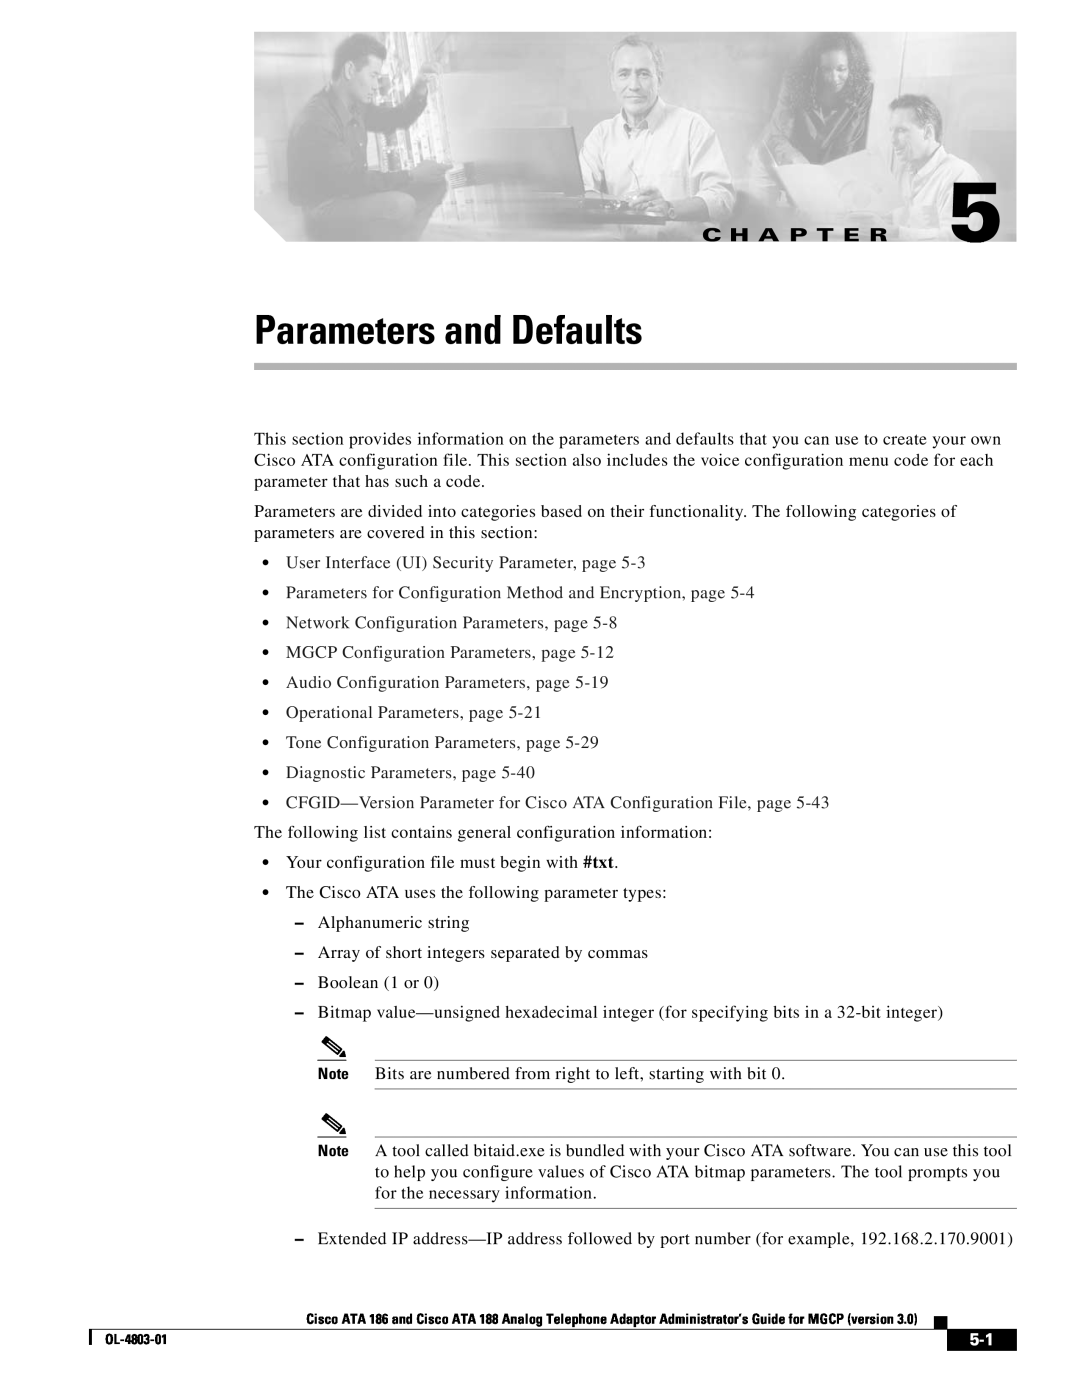 Cisco Systems ATA 186 manual Parameters and Defaults, User Interface UI Security Parameter, page, C H A P T E R 